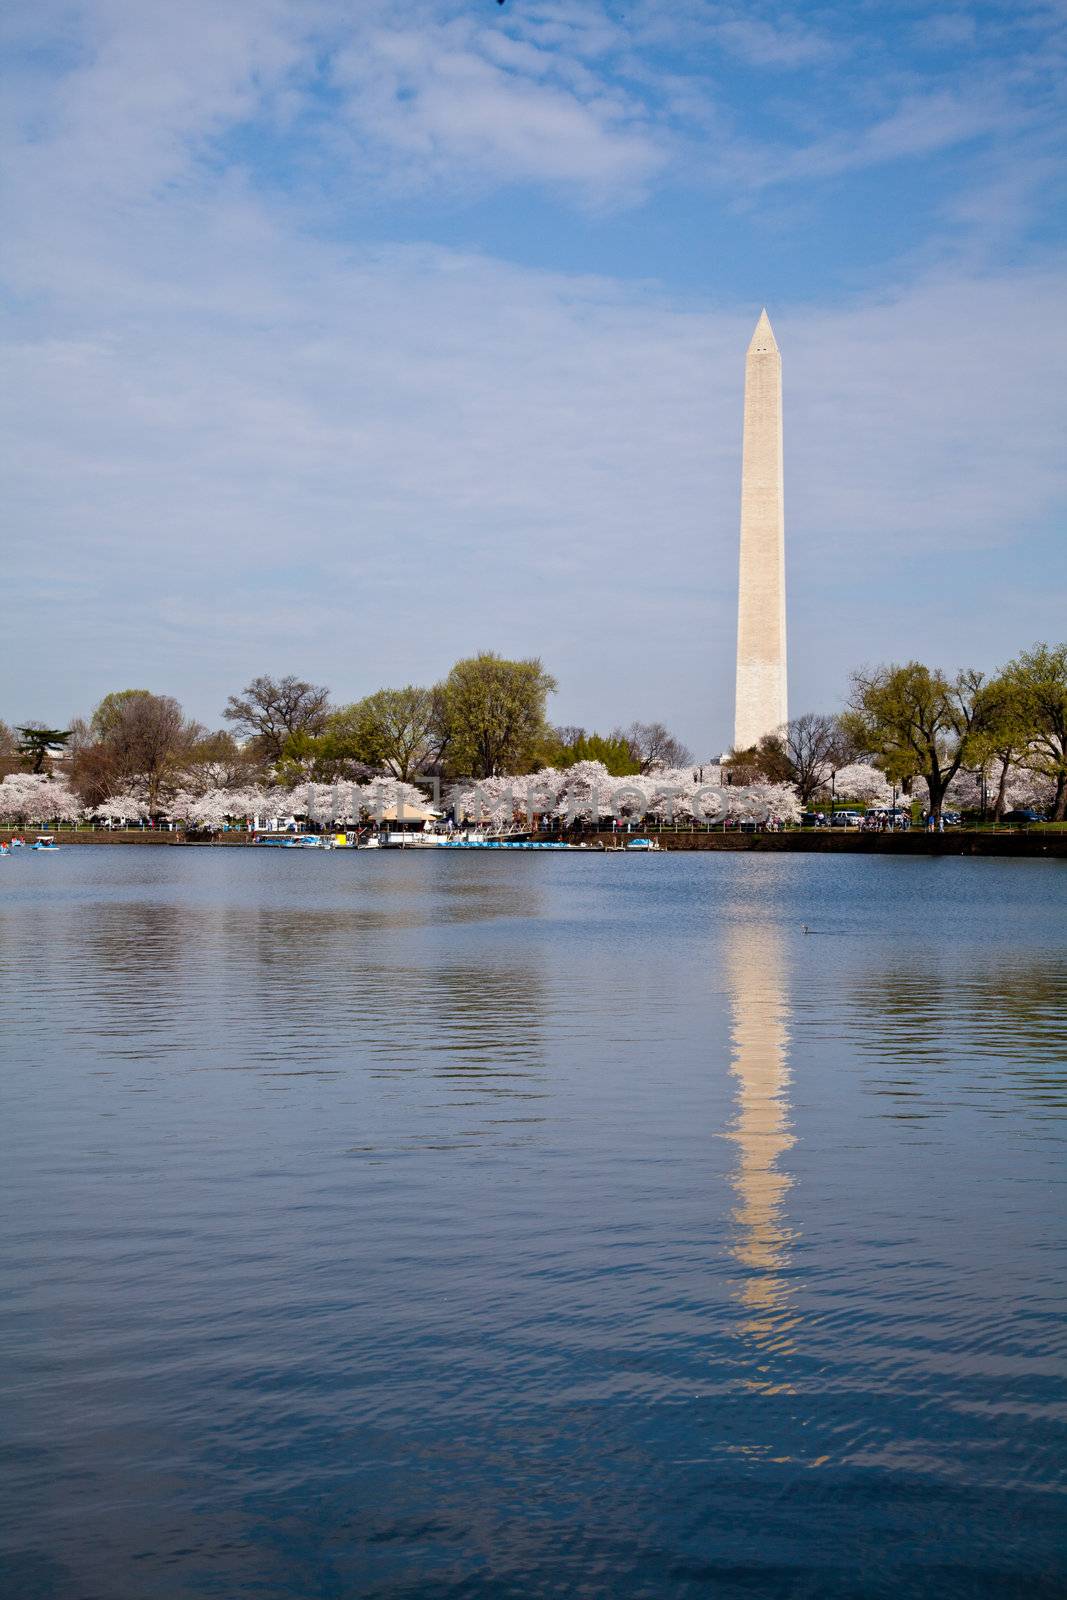 Cherry blossoms around the Tidal Basin in Washington DC with the Washington Monument